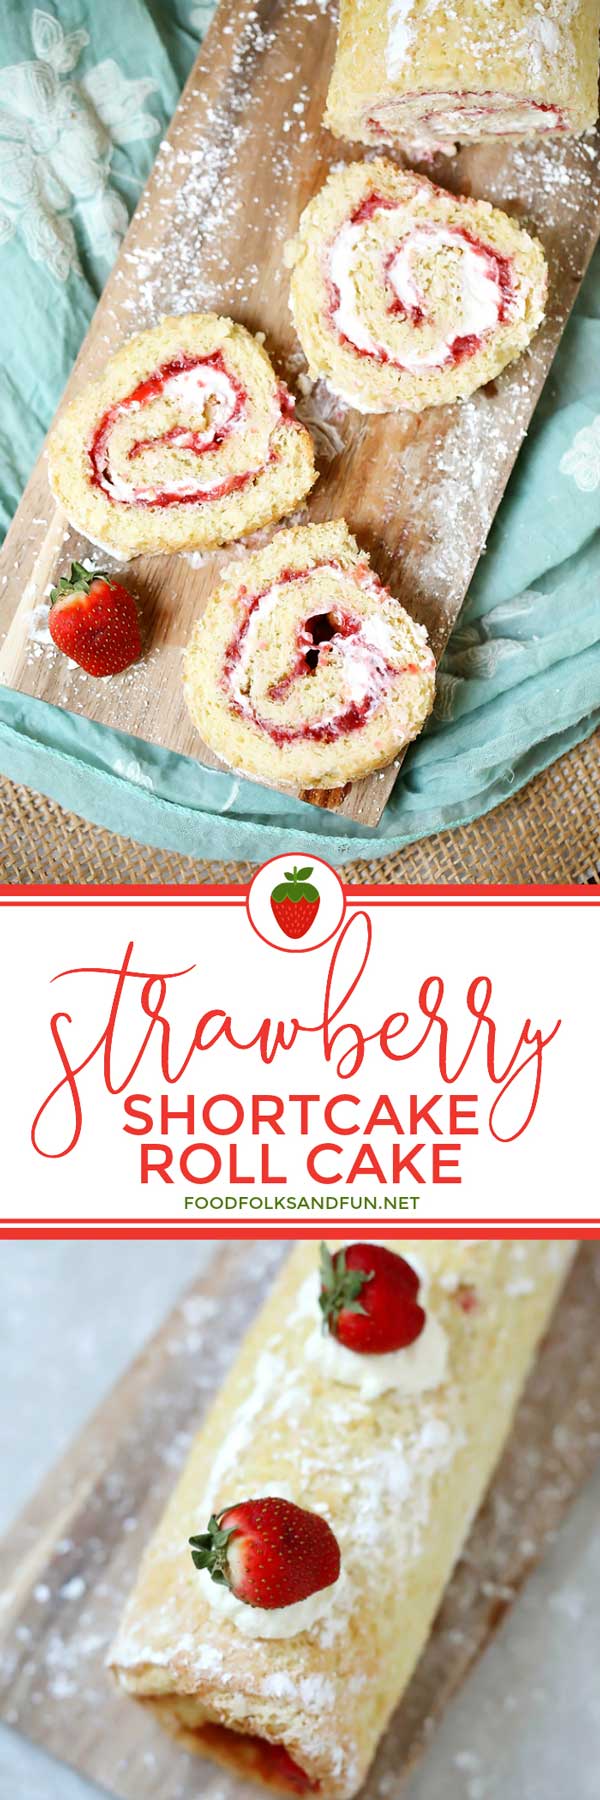 Picture collage of strawberry shortcake roll cake slices and then entire cake.